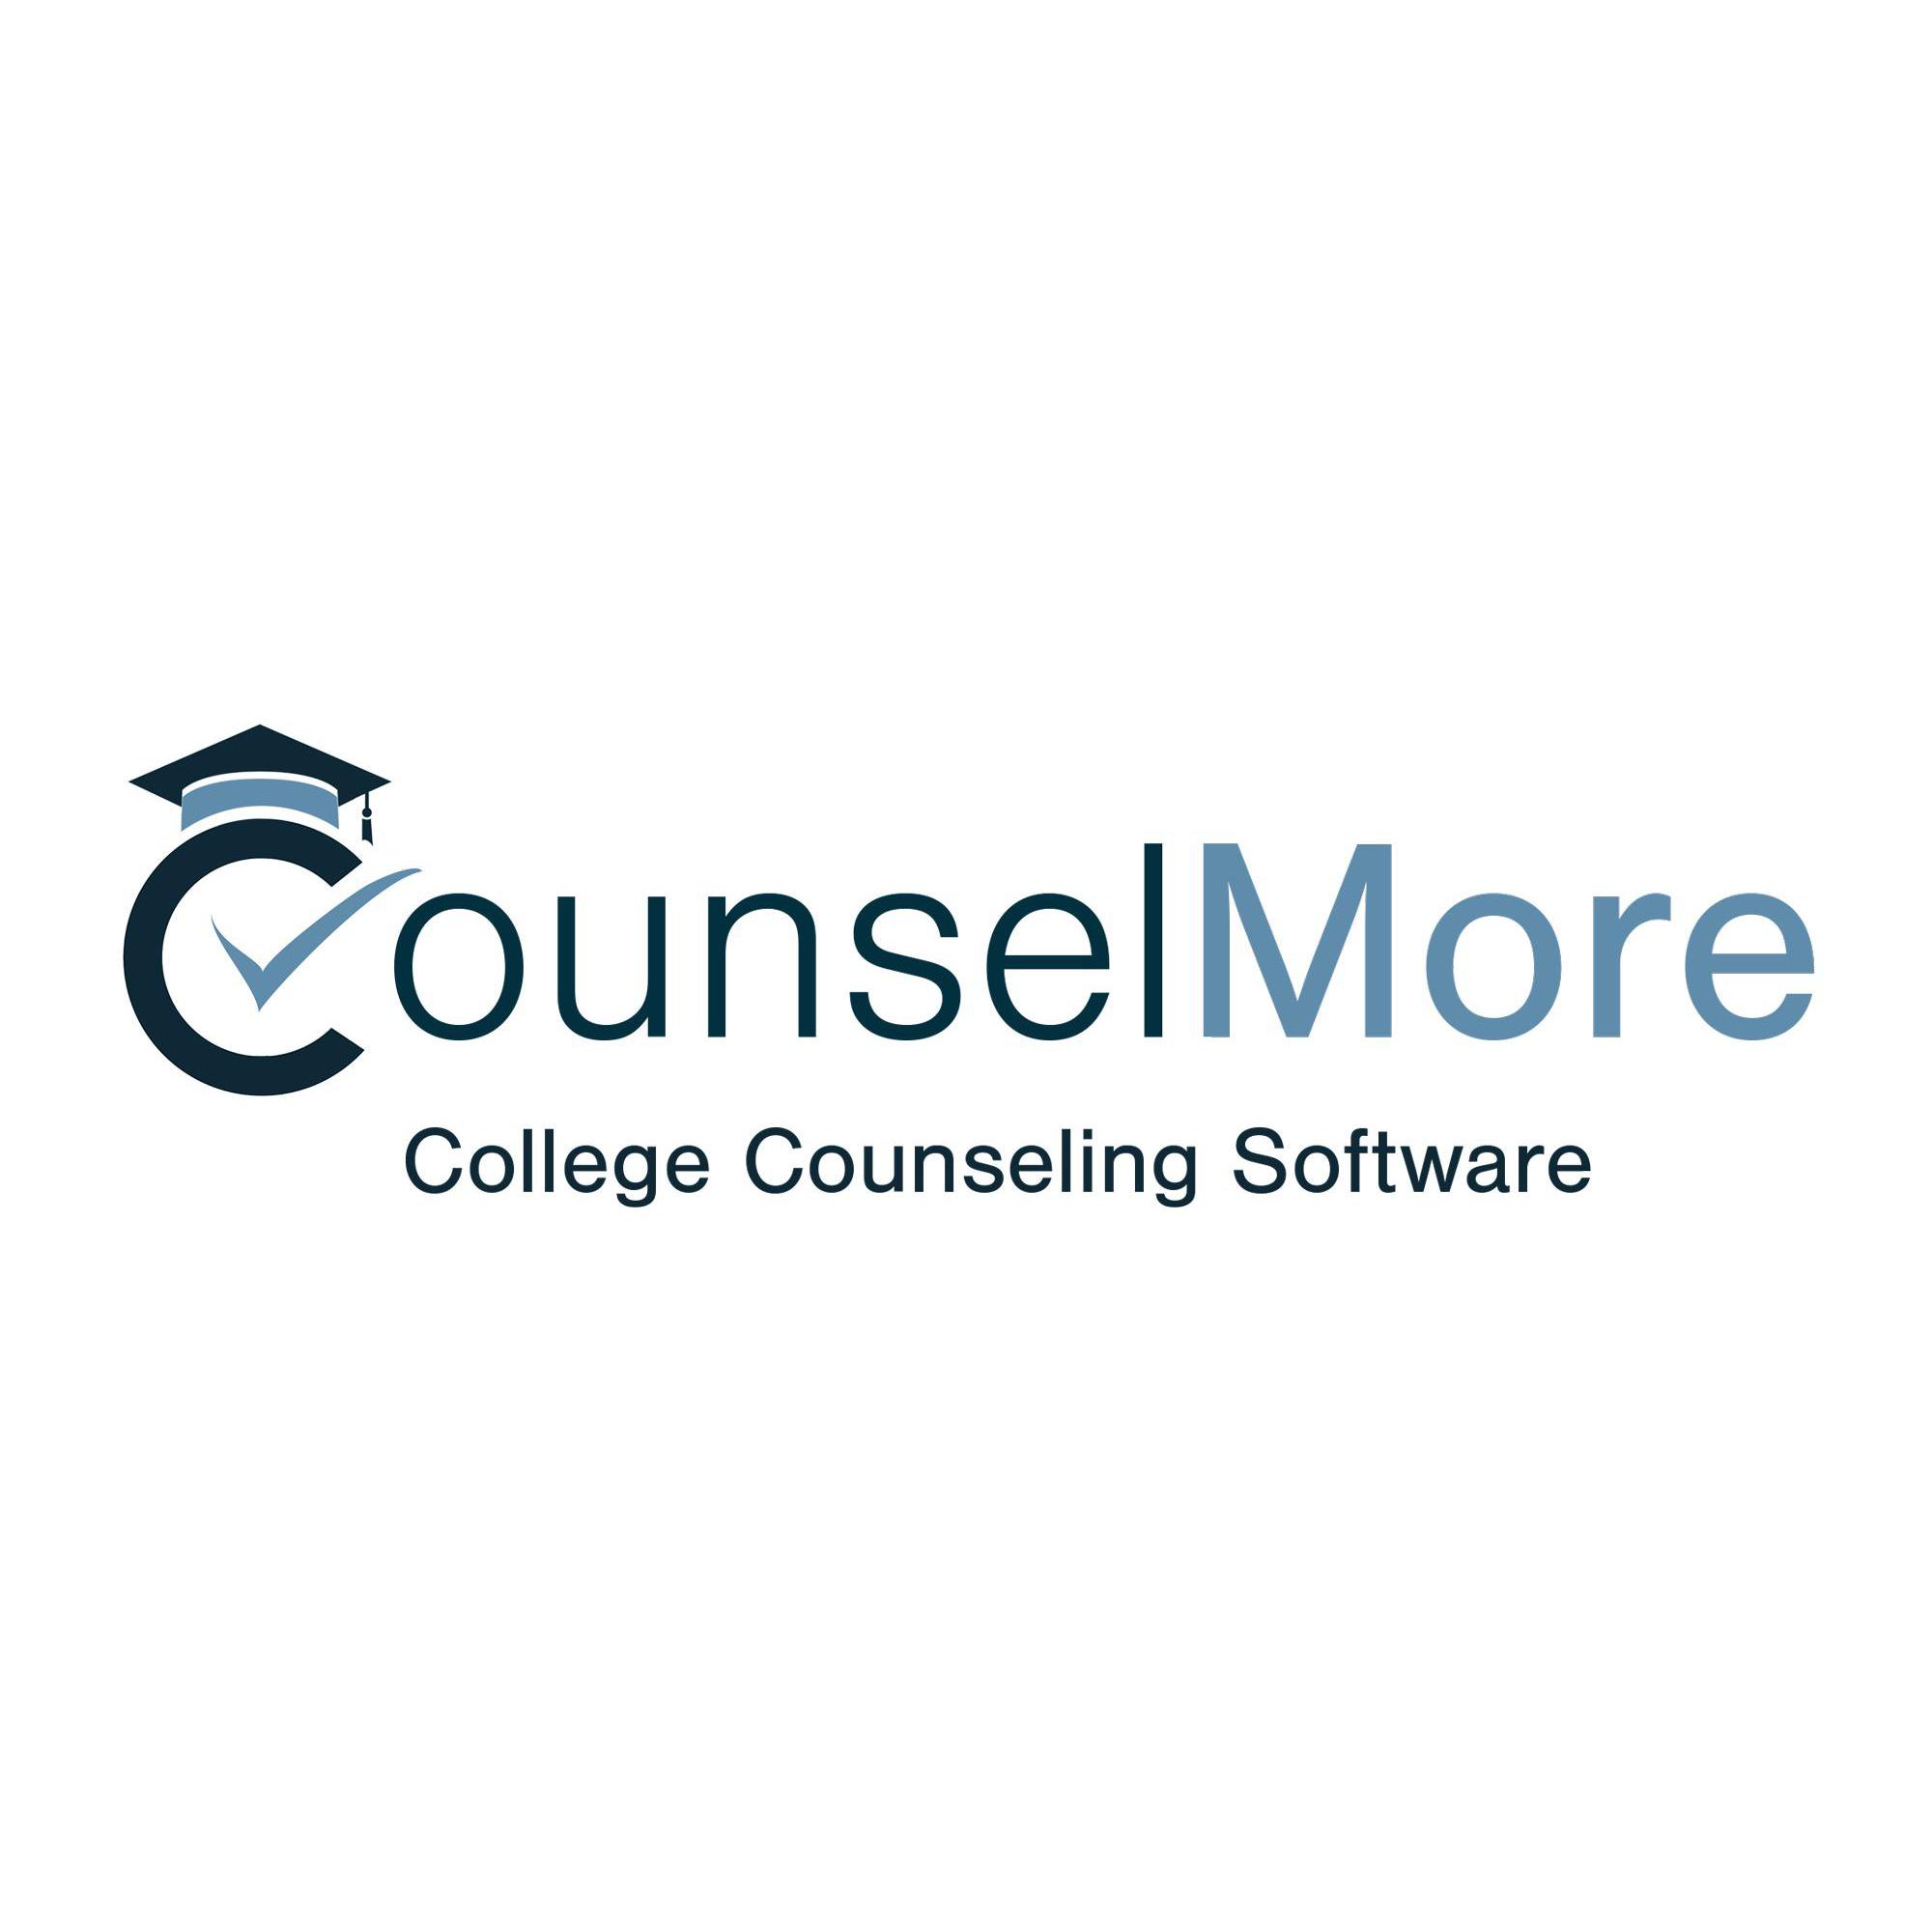 CounselMore College Counseling Software